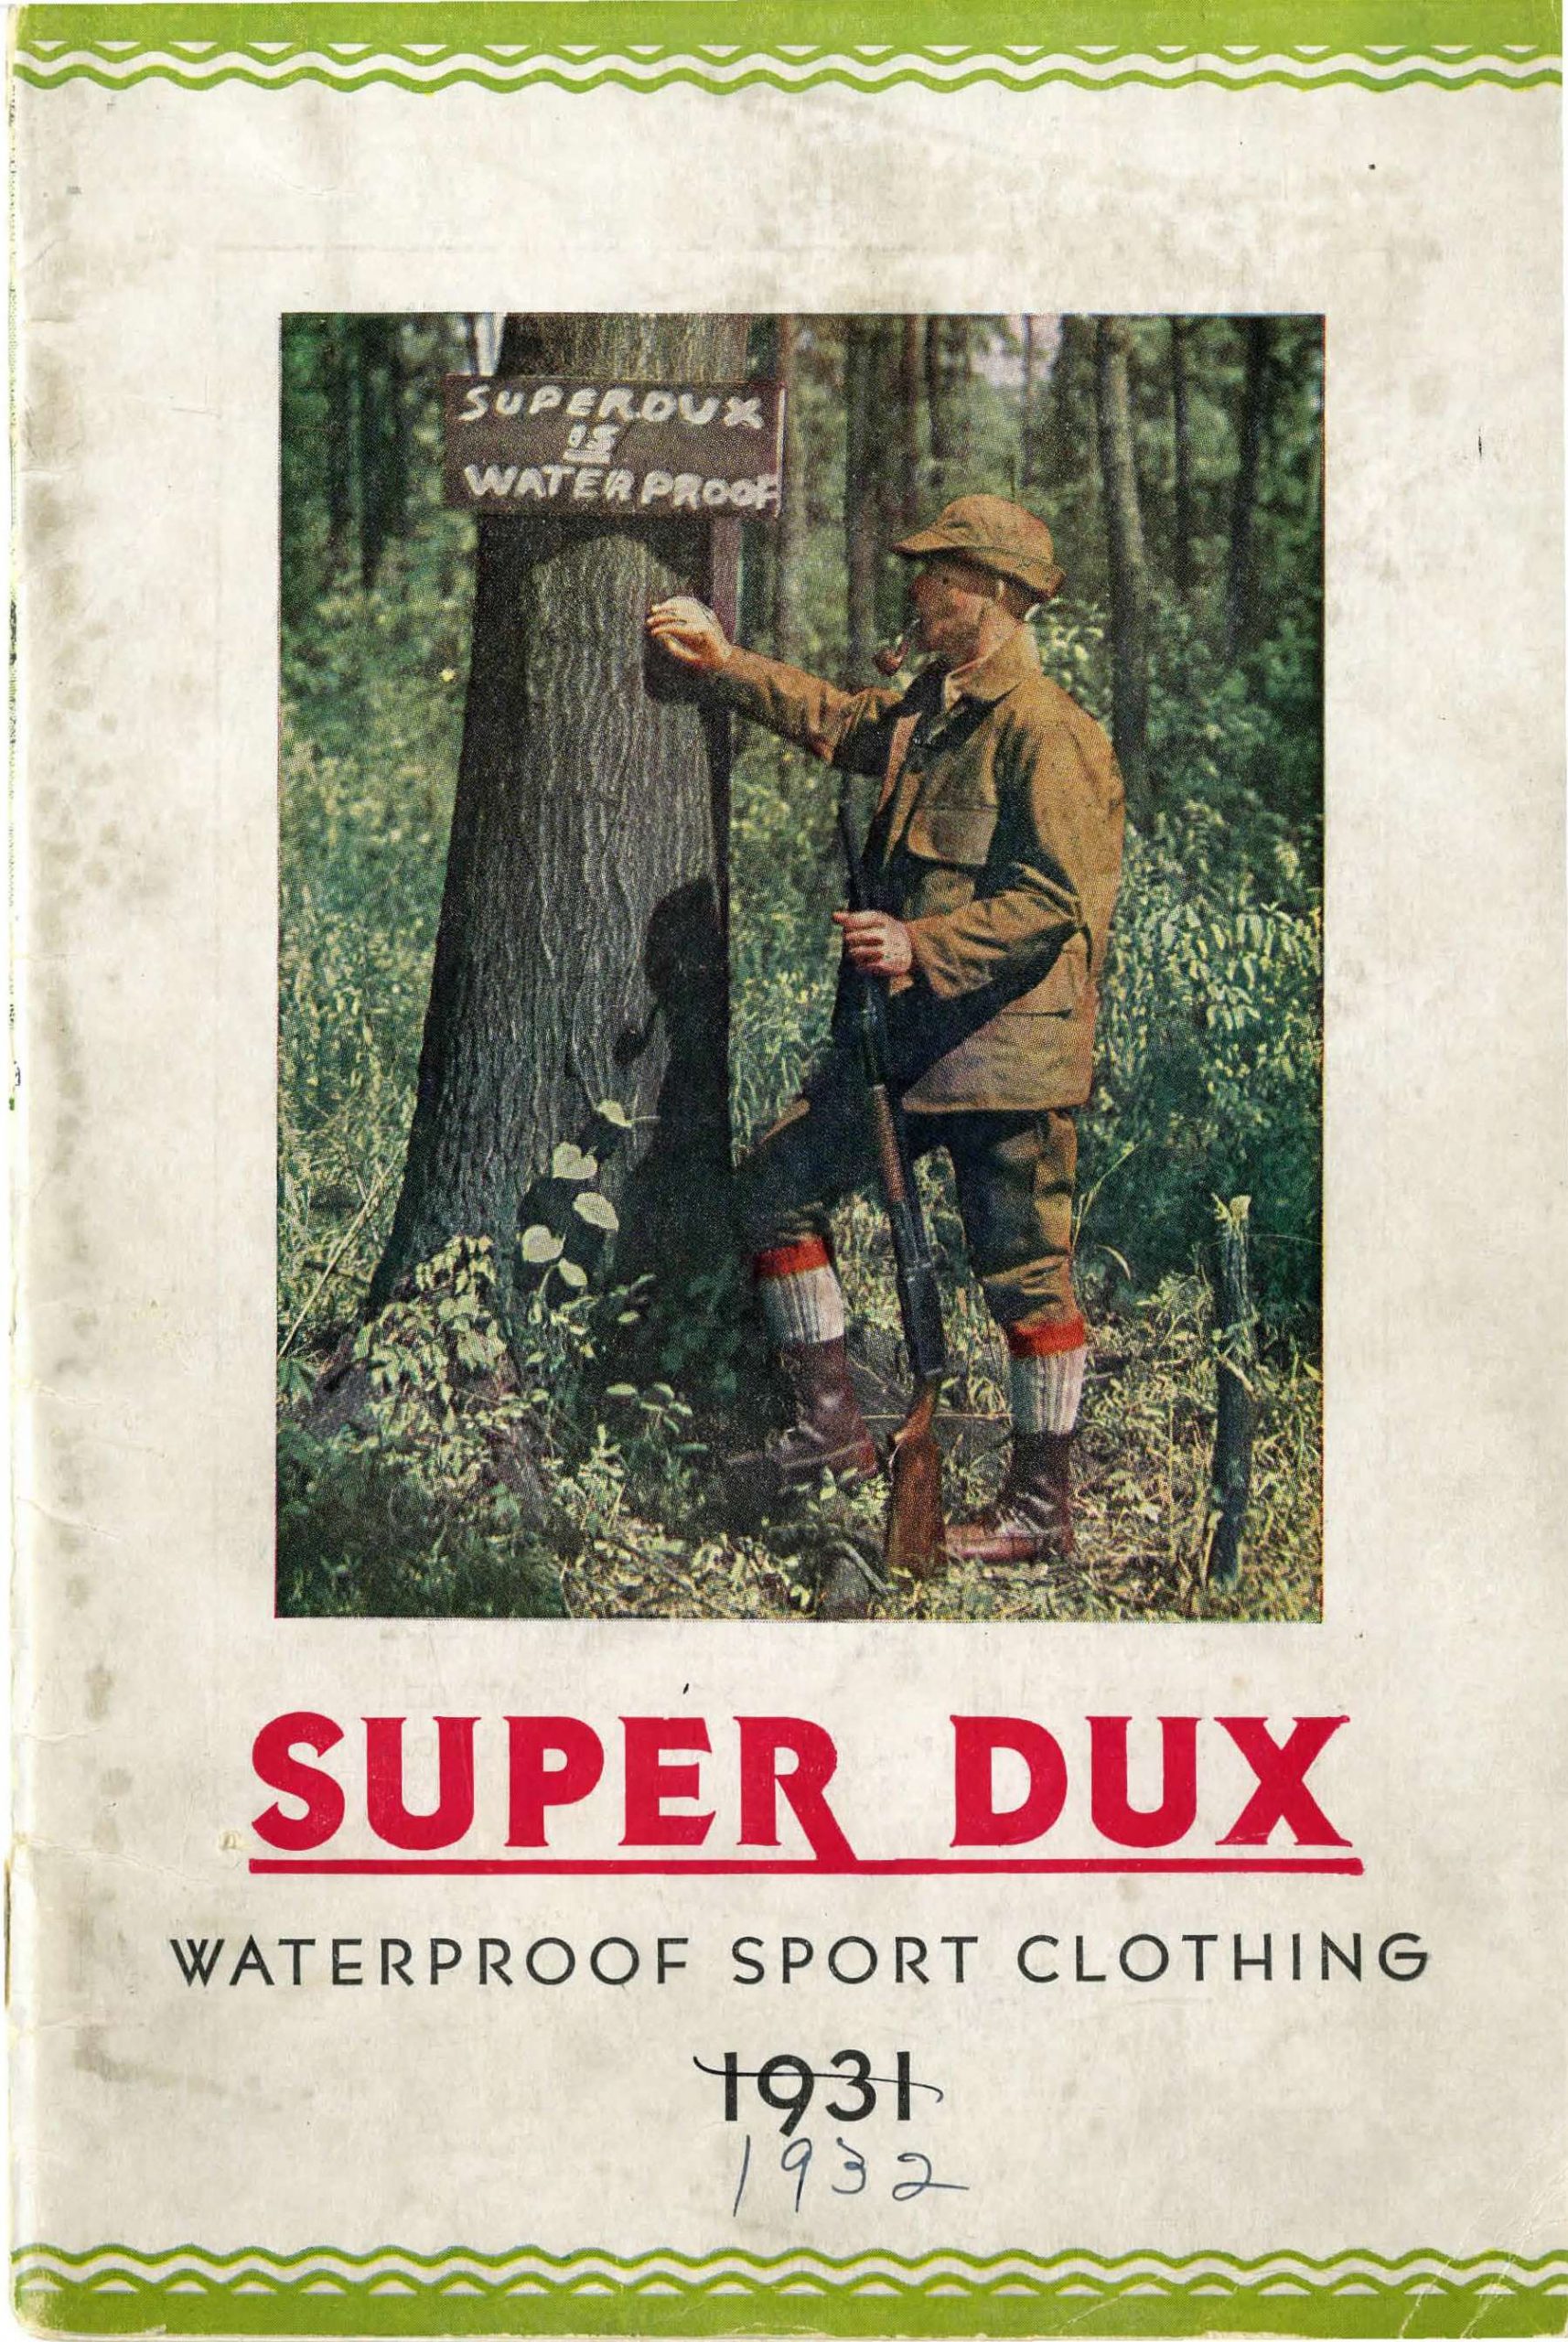 <b>1930-1932:</b> Carhartt looked to expand the brand to new customers, introducing the Super Dux and Super Fab product lines for outdoor sportsmen. The key selling point for these garments was their waterproof properties.
